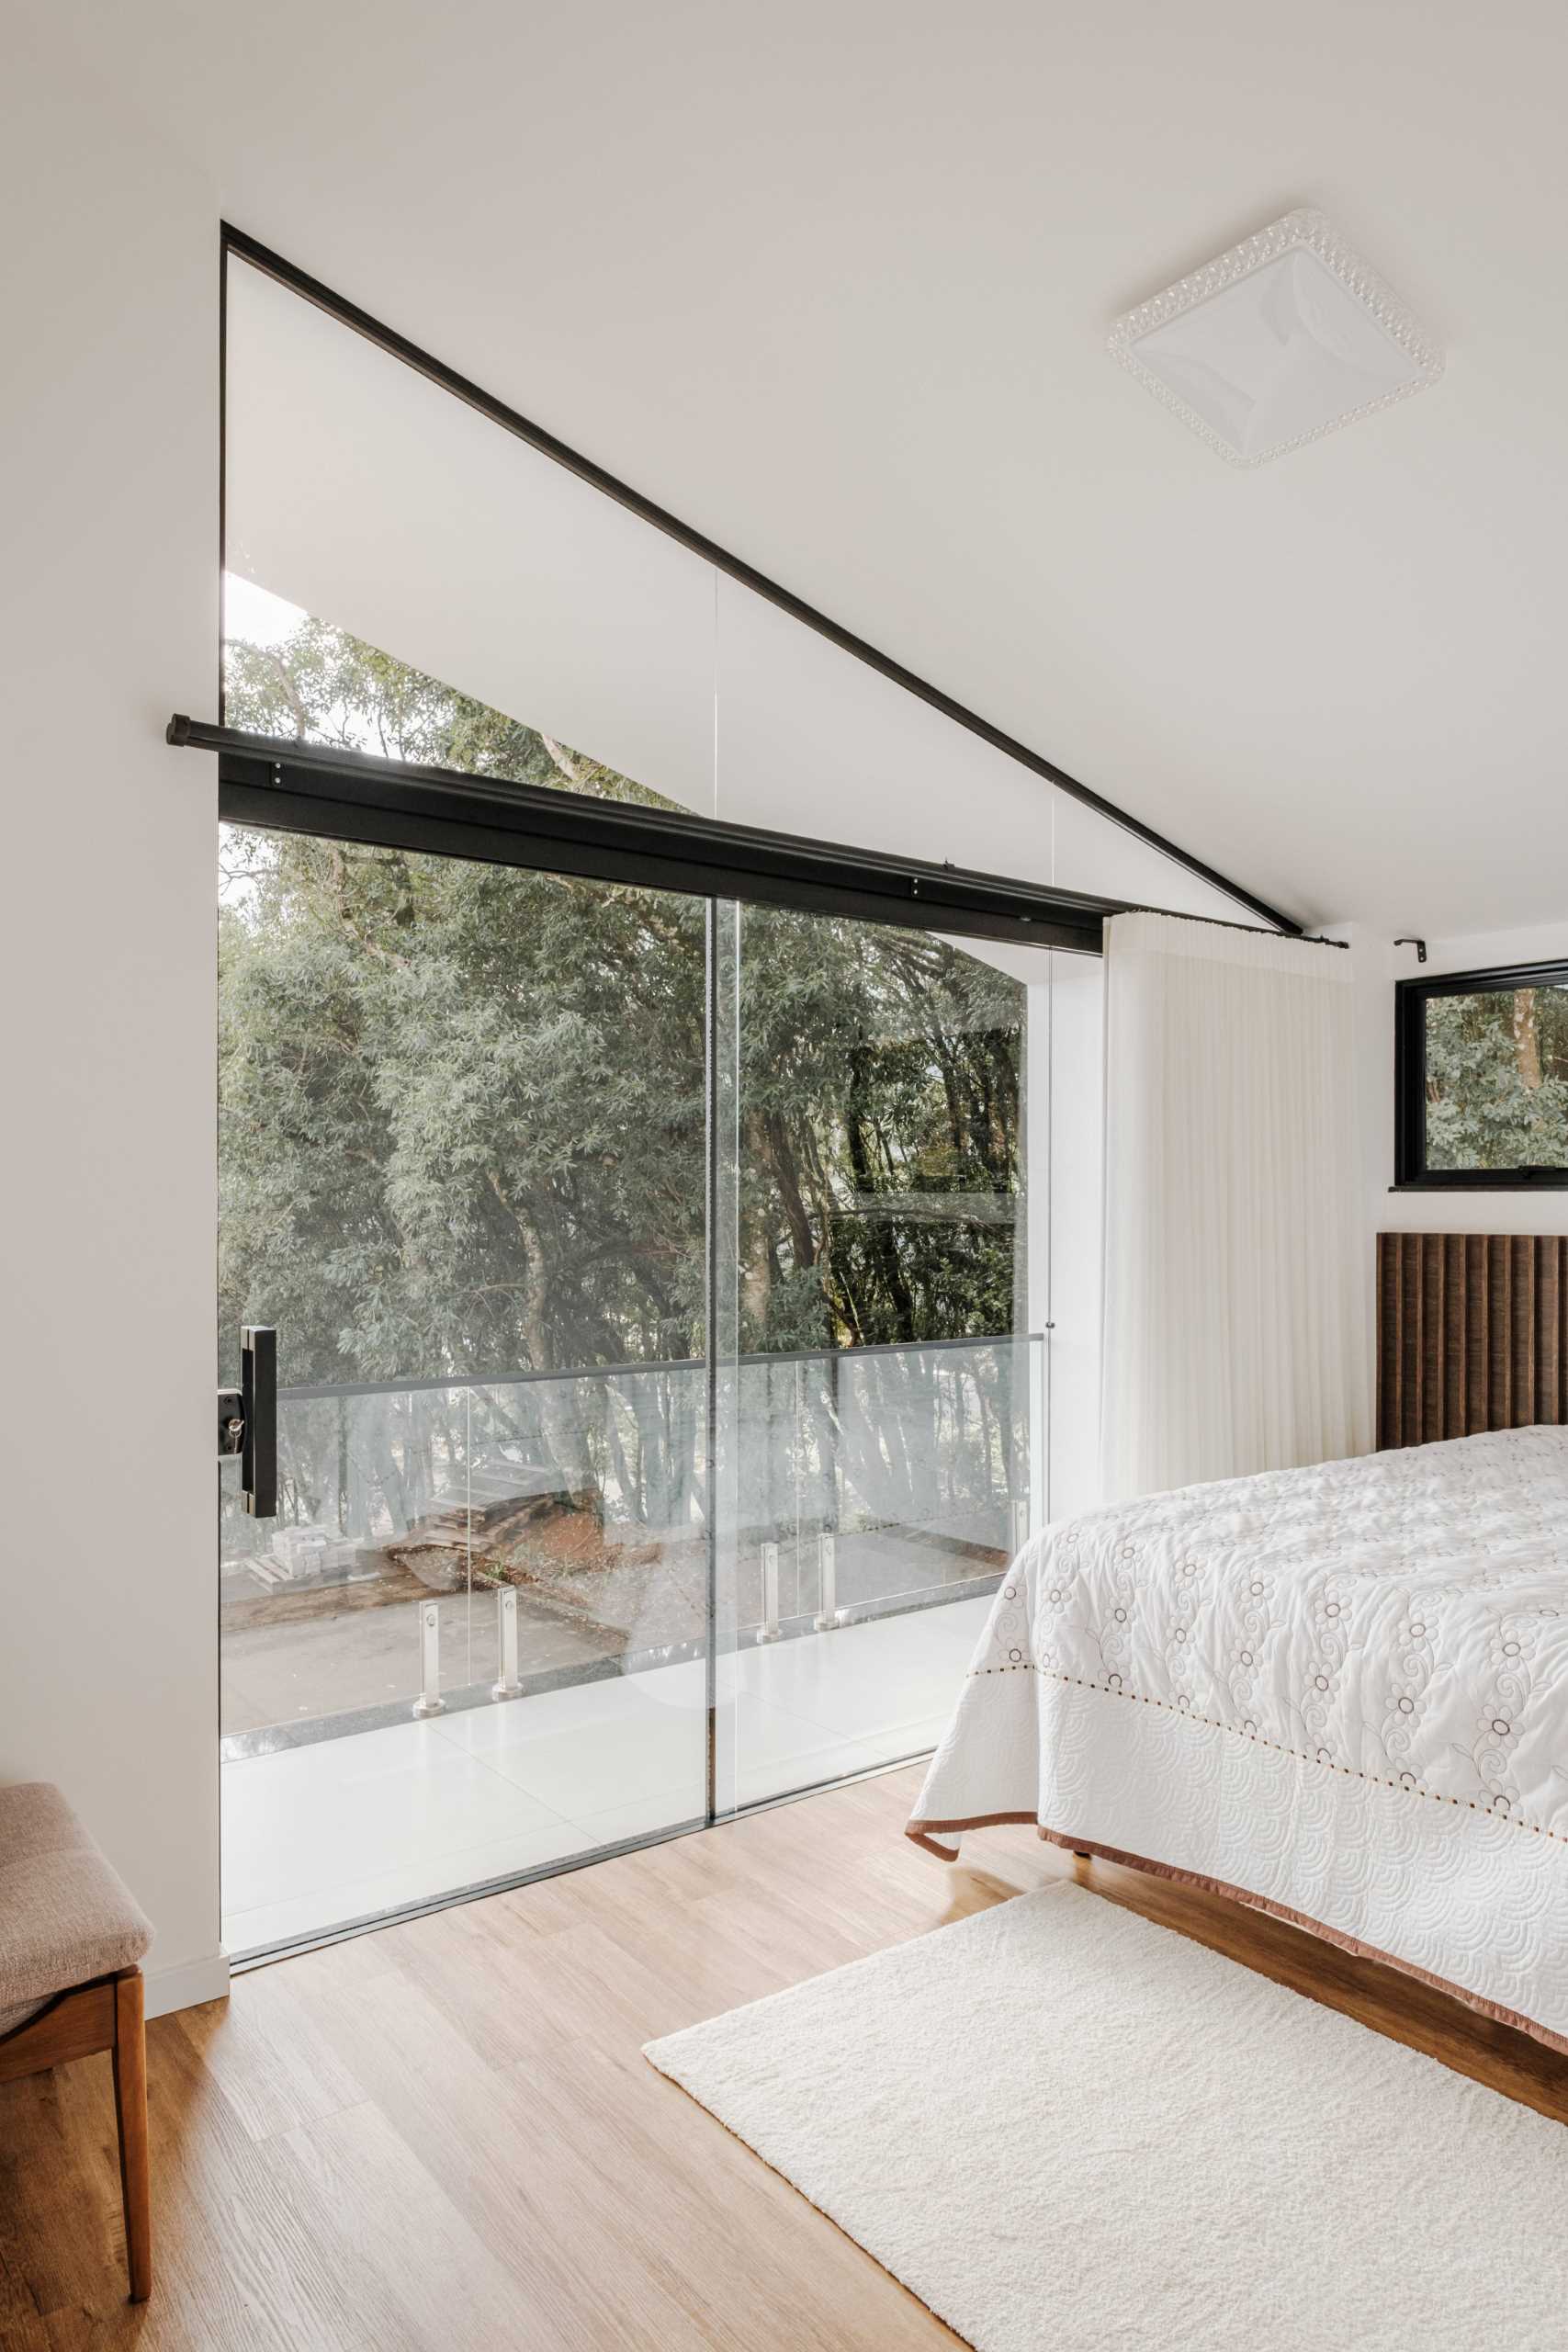 In this modern bedroom, the window follows the angled roofline, and a sliding door connects the space with the balcony.